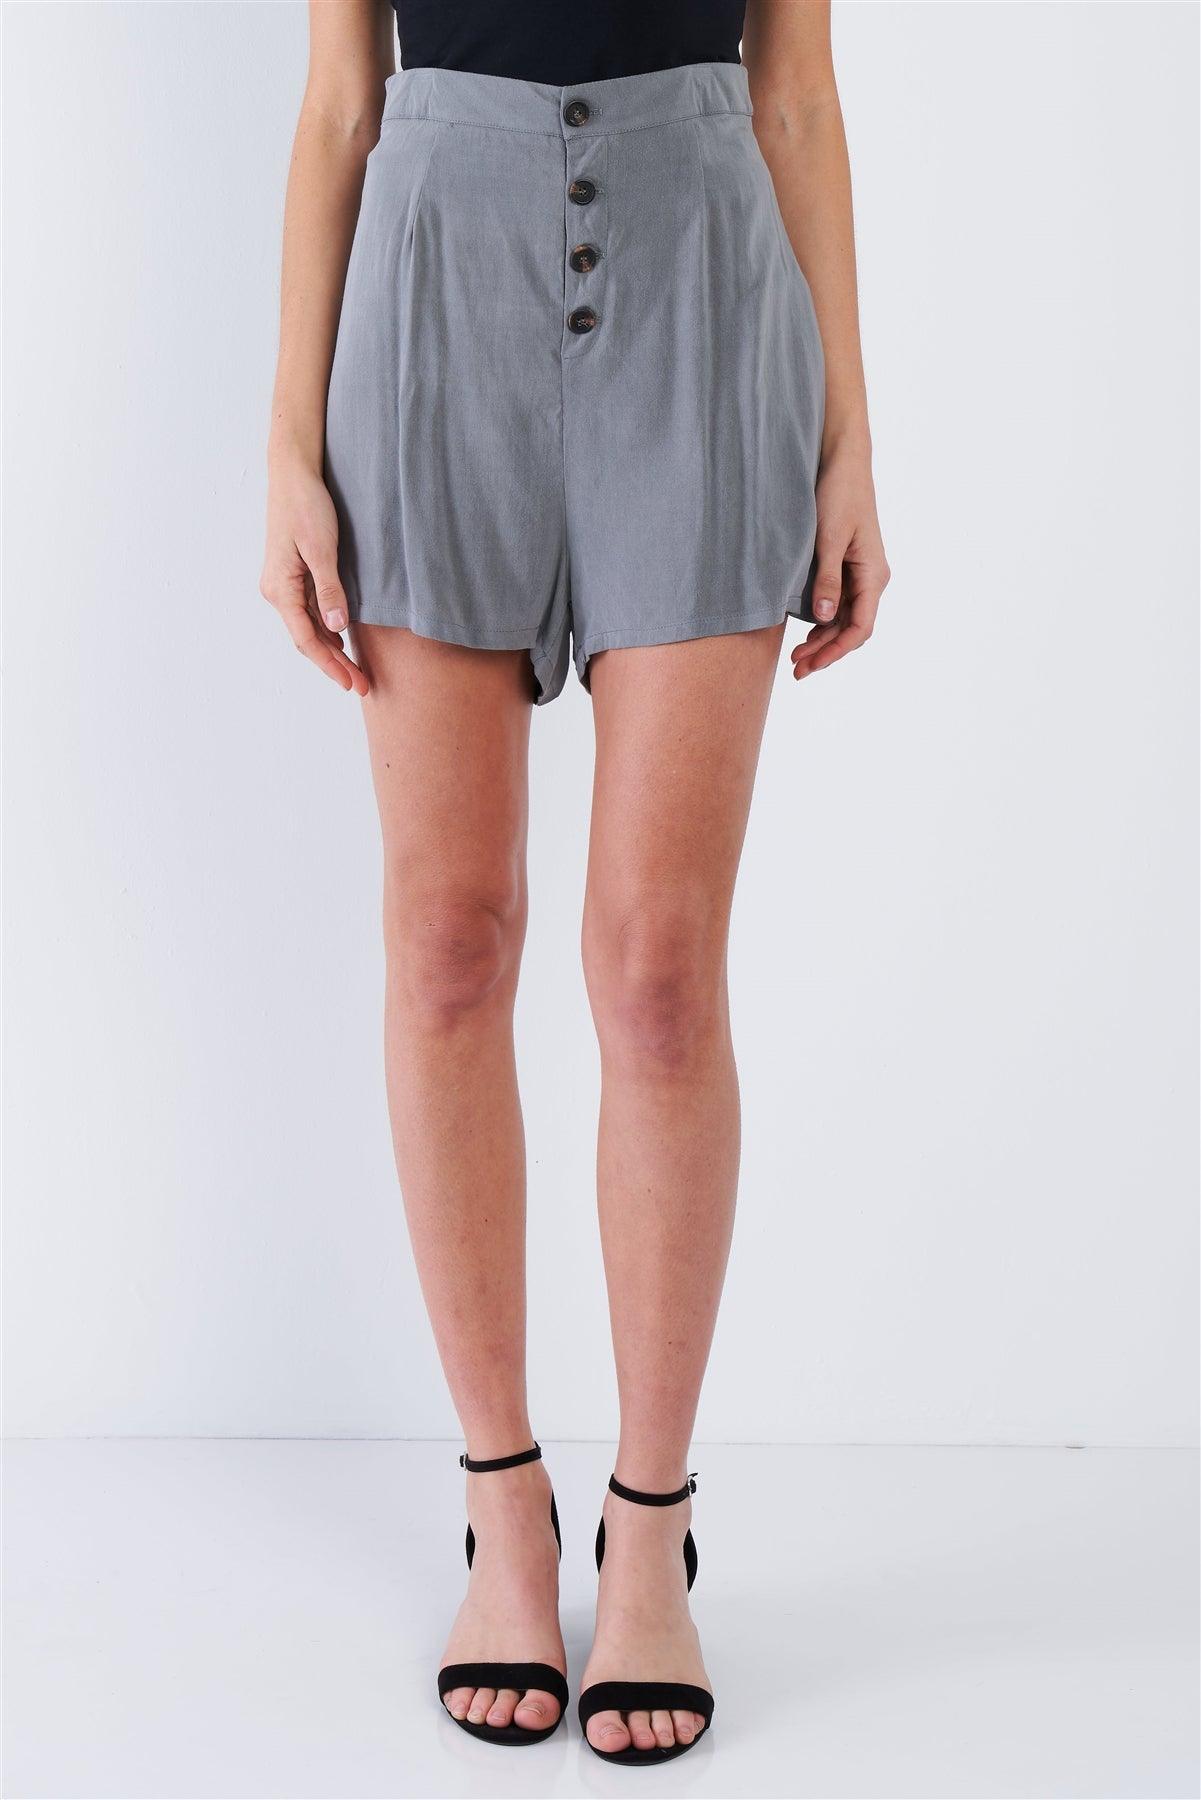 Charcoal Grey Casual Chic Mini Front Button Shorts /4-2-1